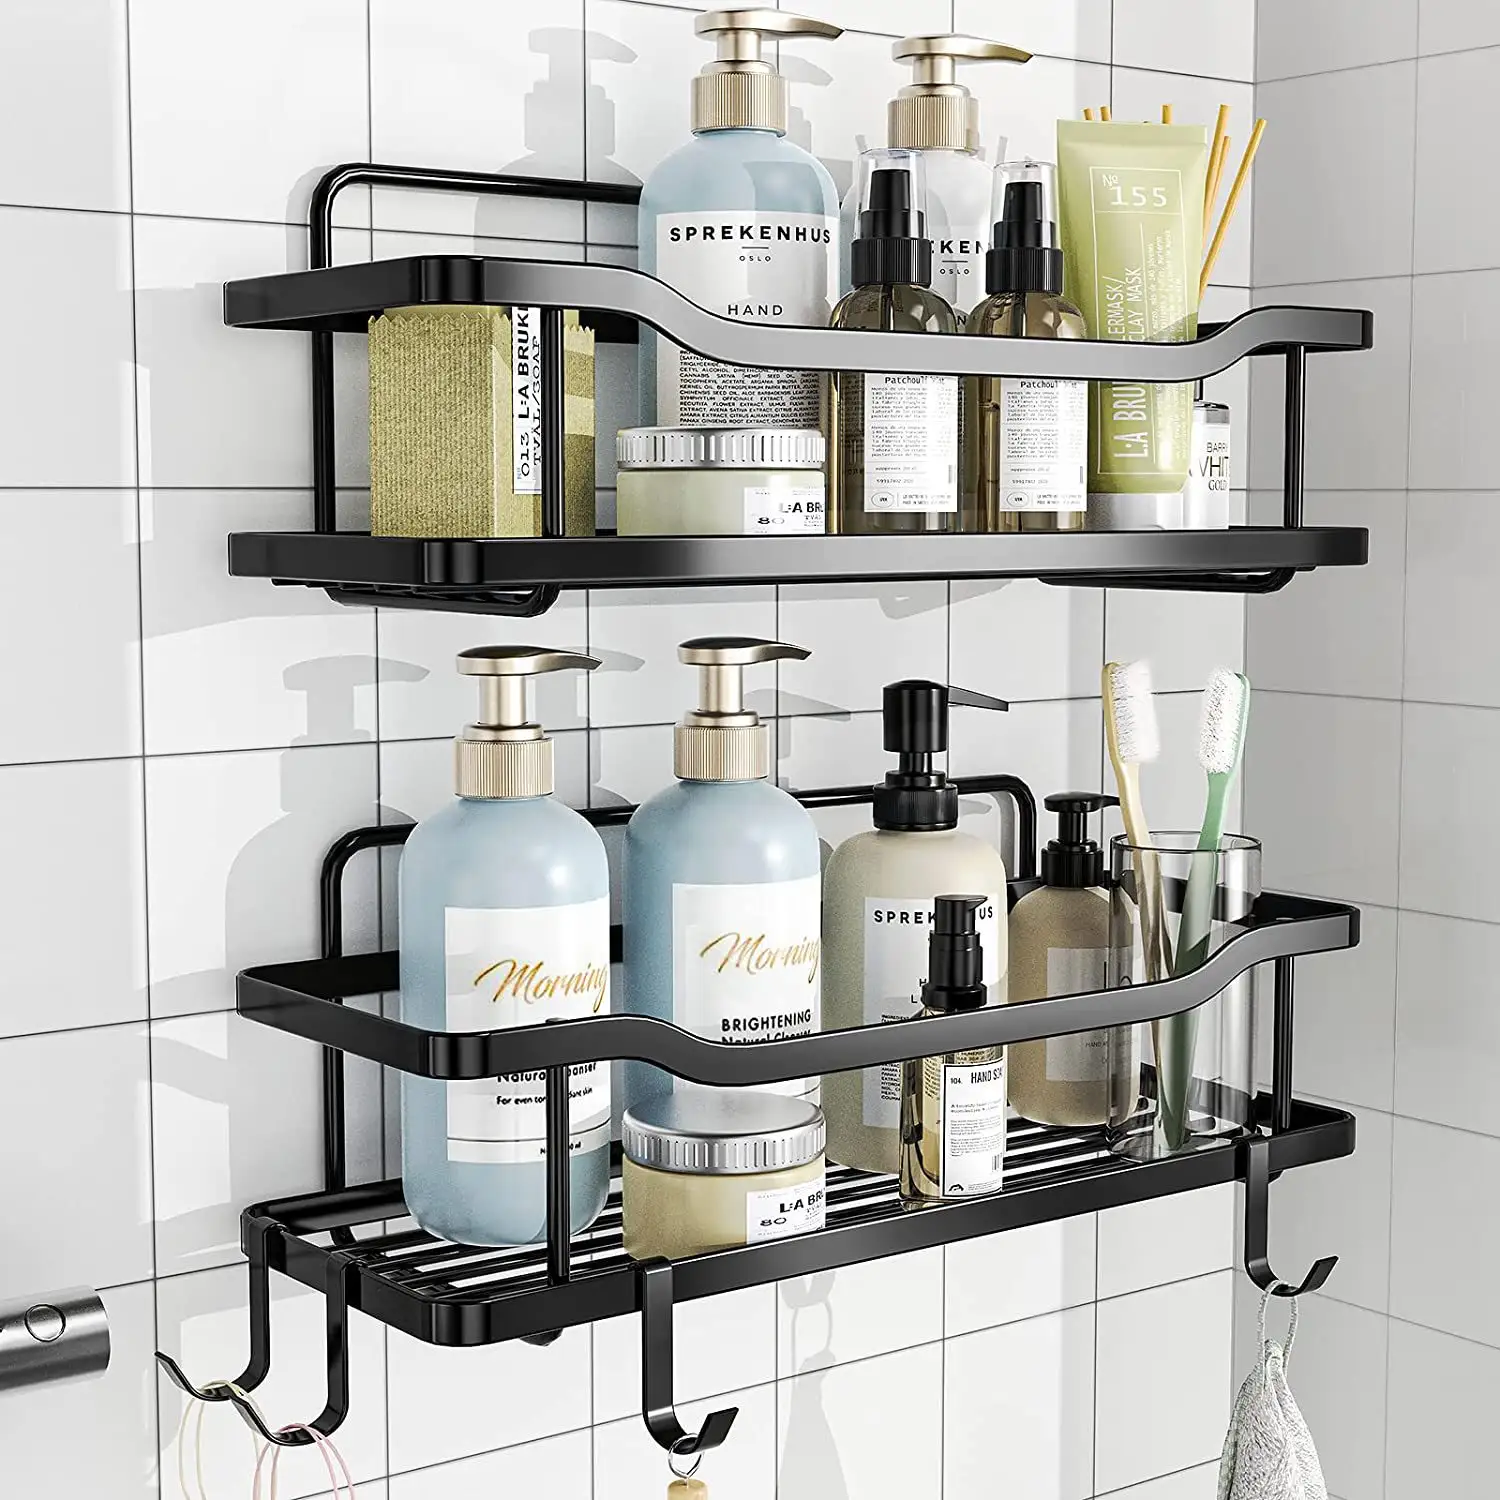 Hot Sell Stainless Steel Soap Rack Shower Caddy Organizers Bathroom Shelf Wall